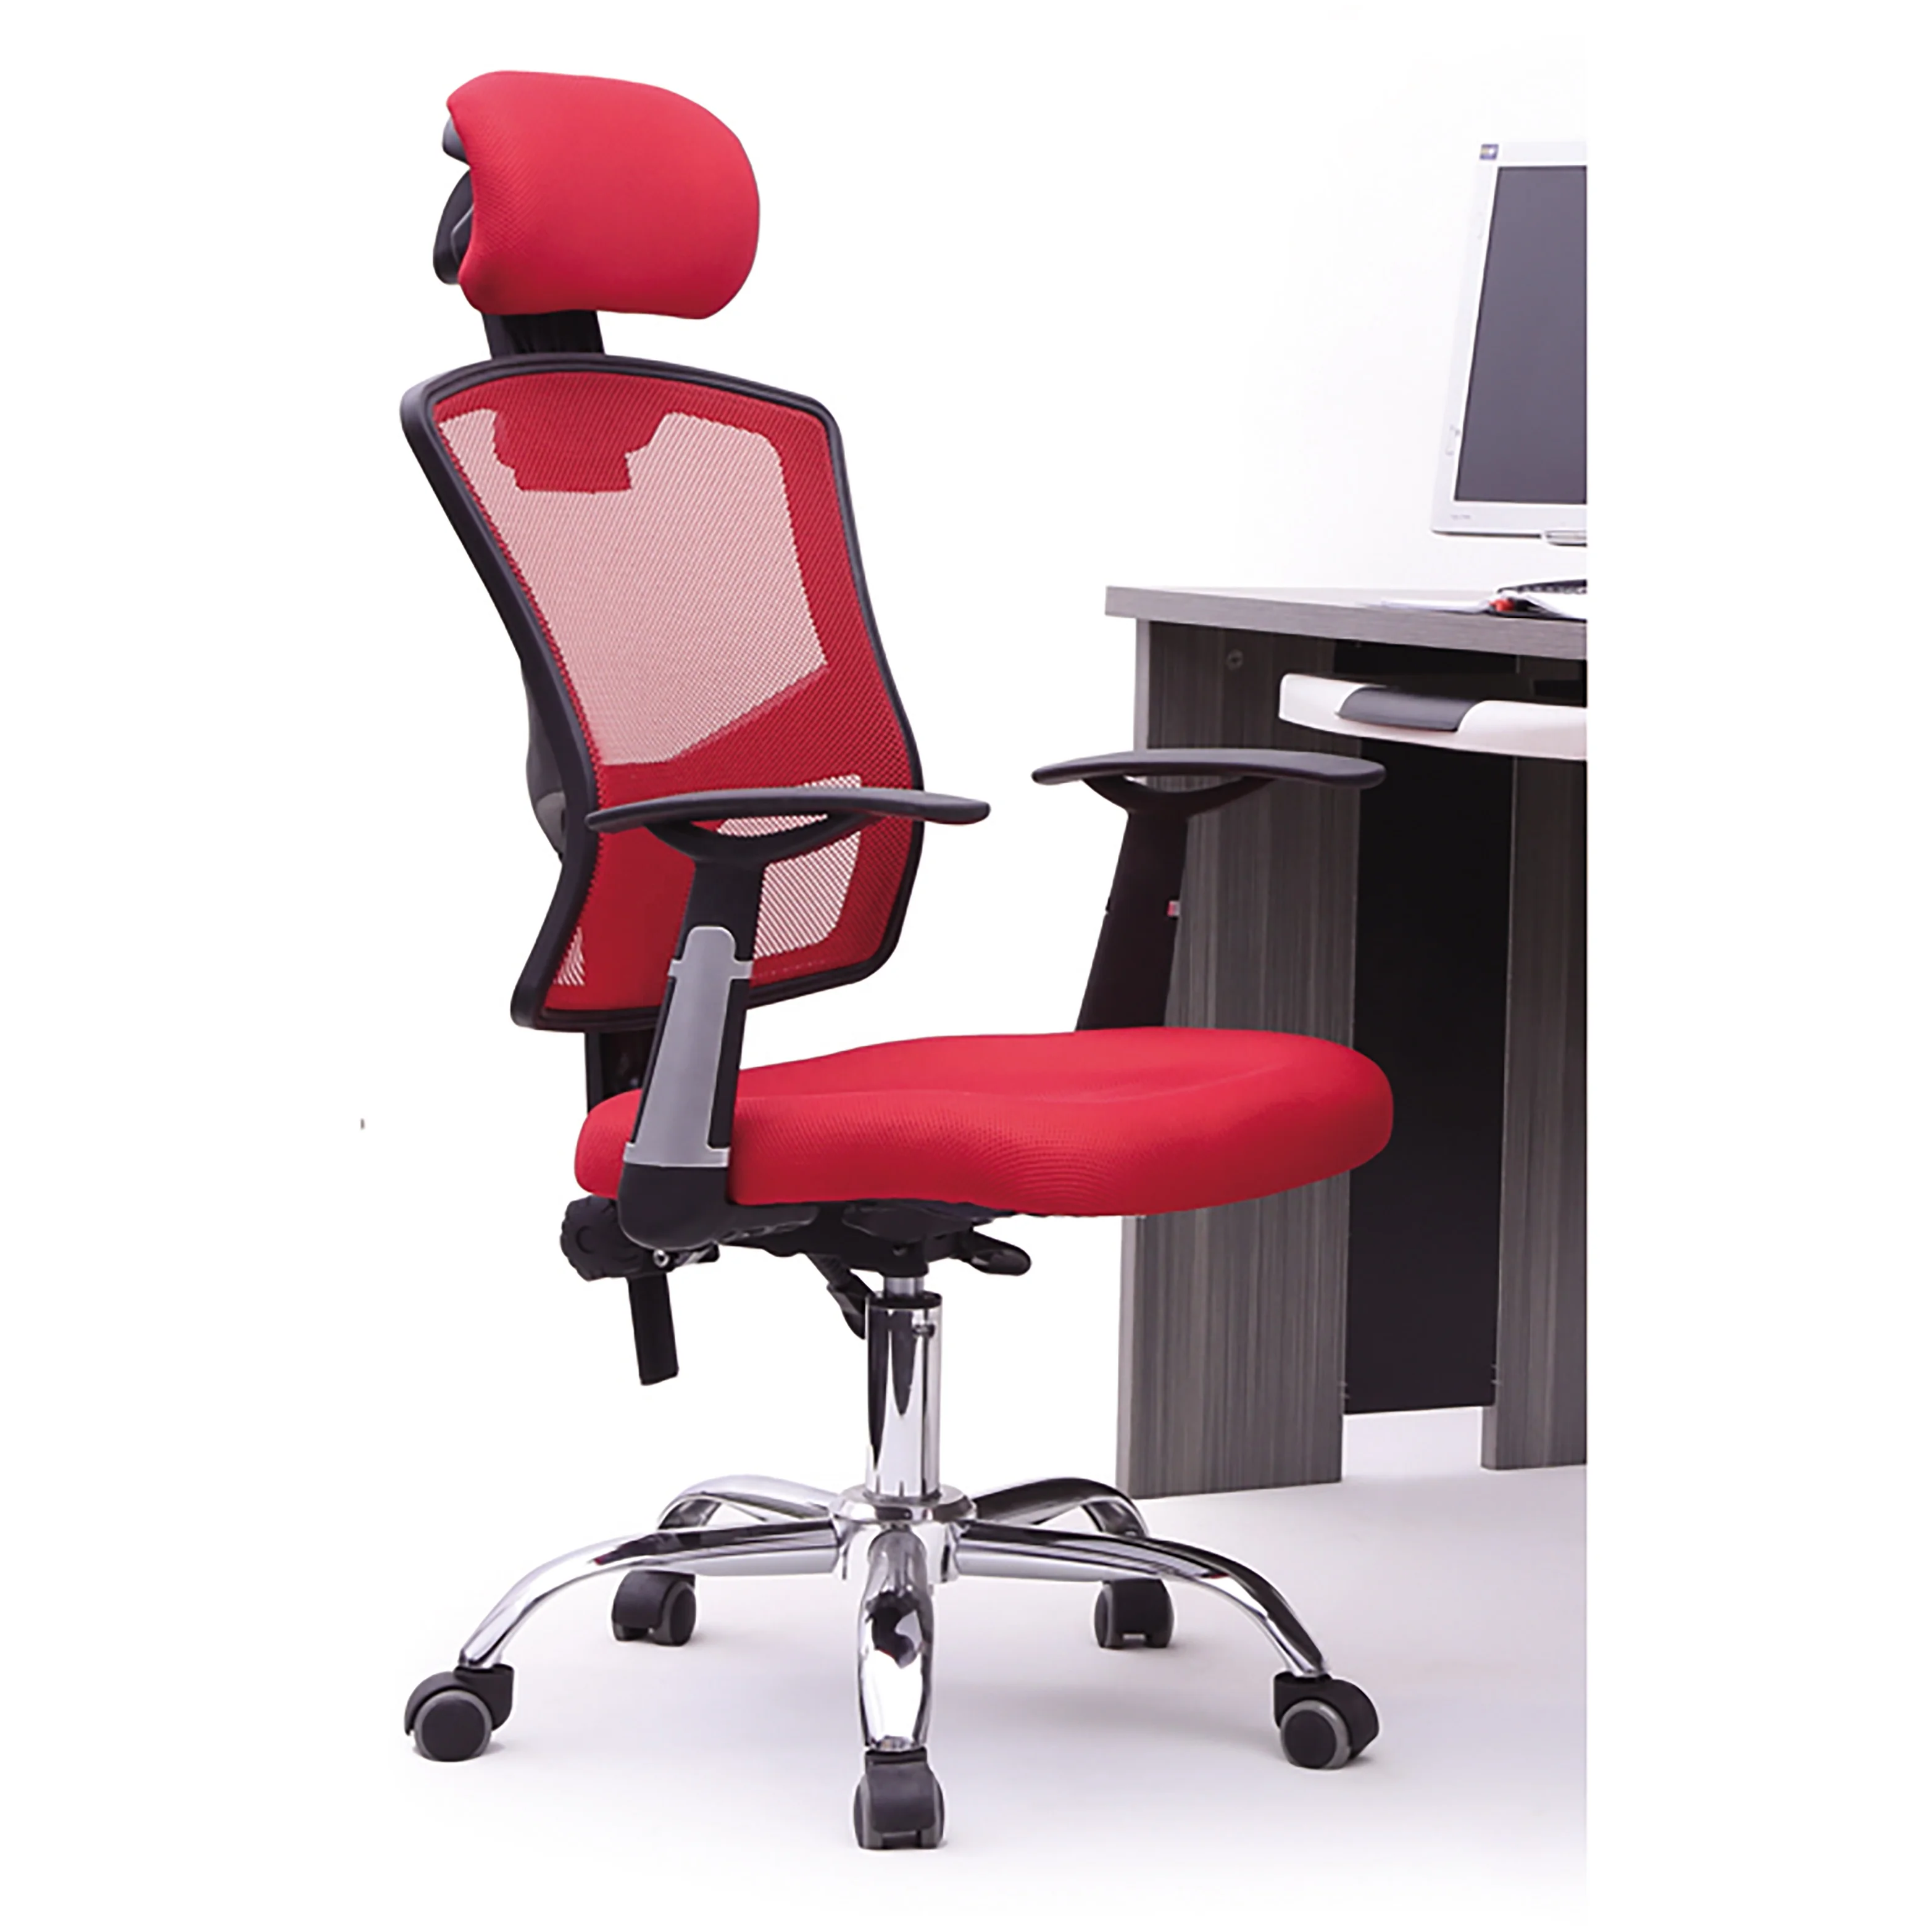 Office Furniture Online Discount Study Computer Chairs For Sale Buy Discount Computer Chairs Study Chairs For Sale Office Furniture Online Product On Alibaba Com